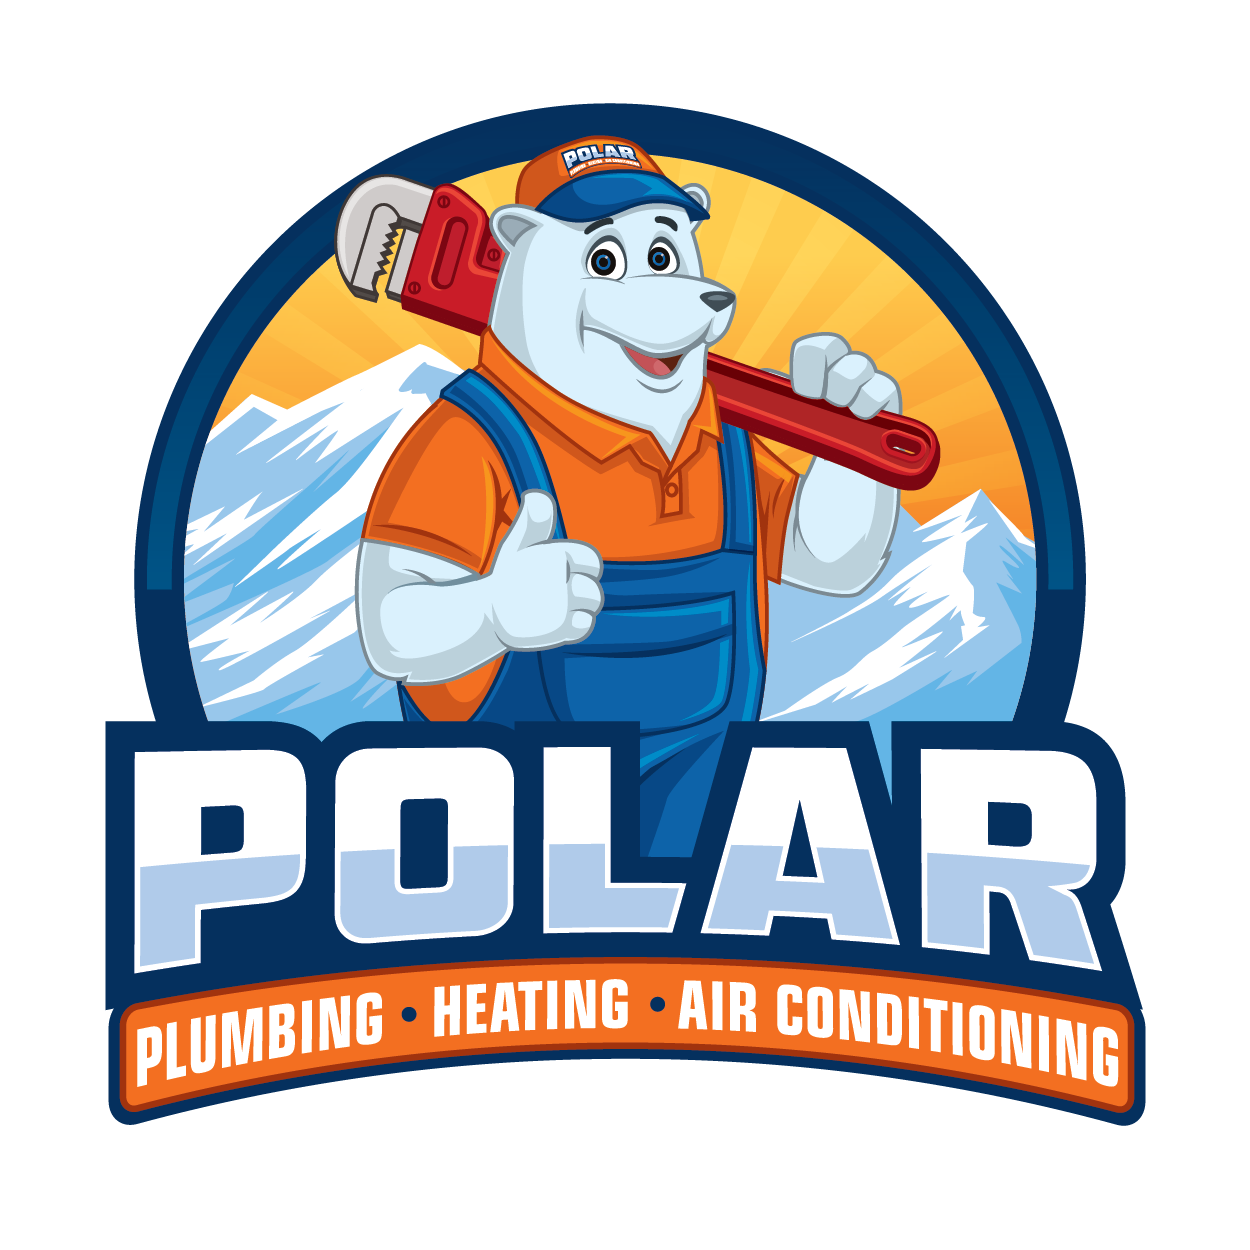 Polar Plumbing, Heating and Air Conditioning Photo